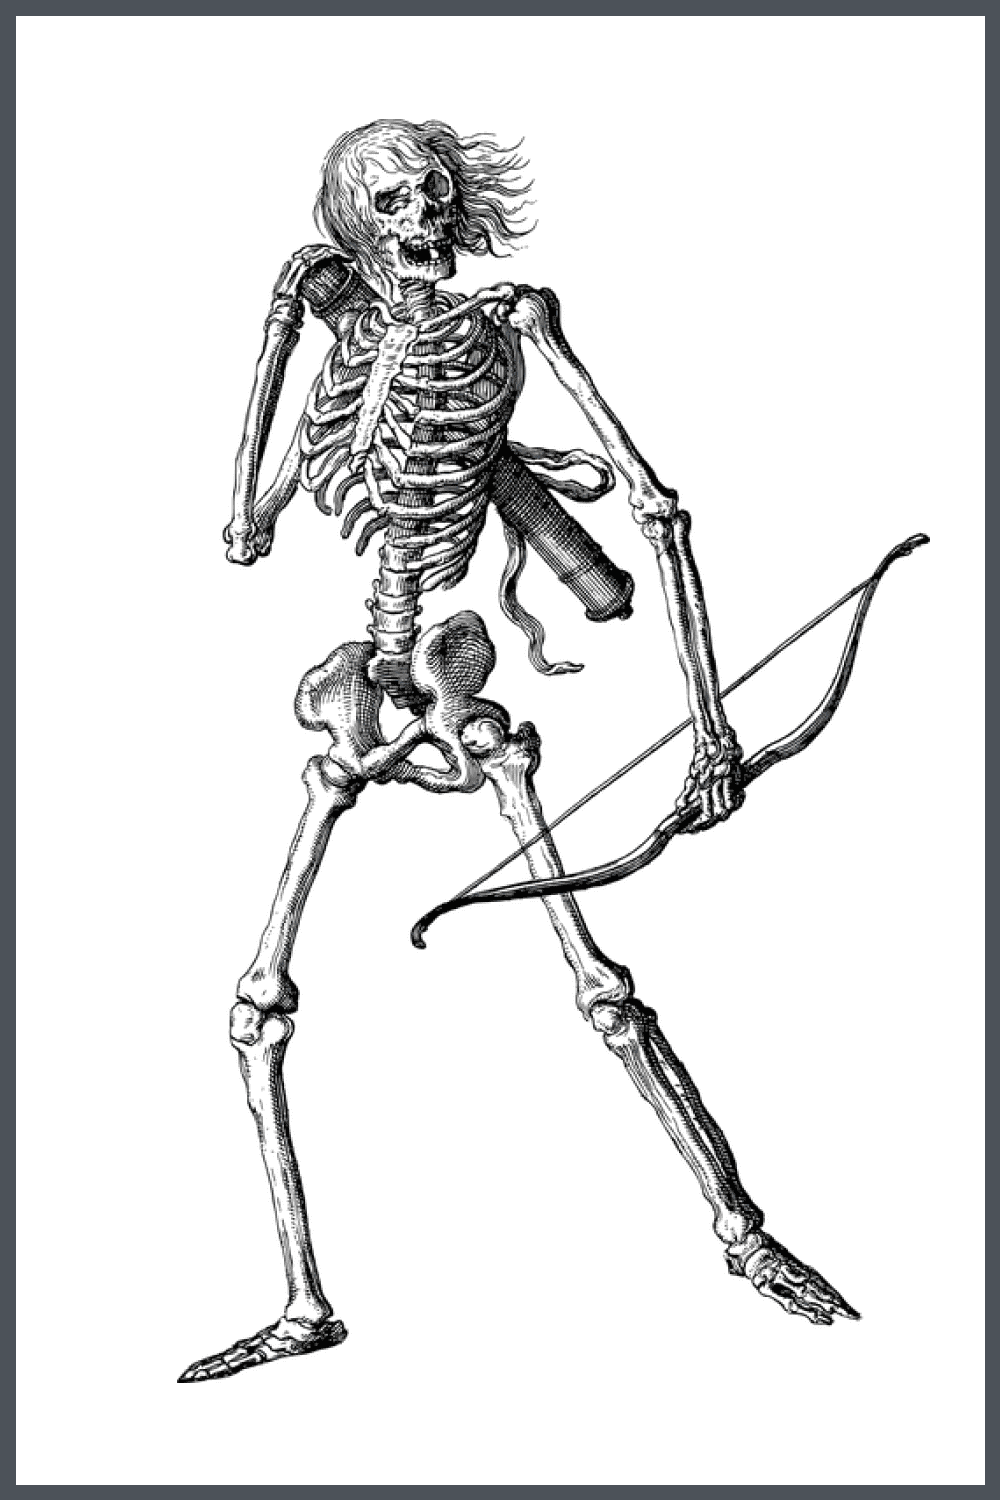 The skeleton of a warrior ready to fight for his country.